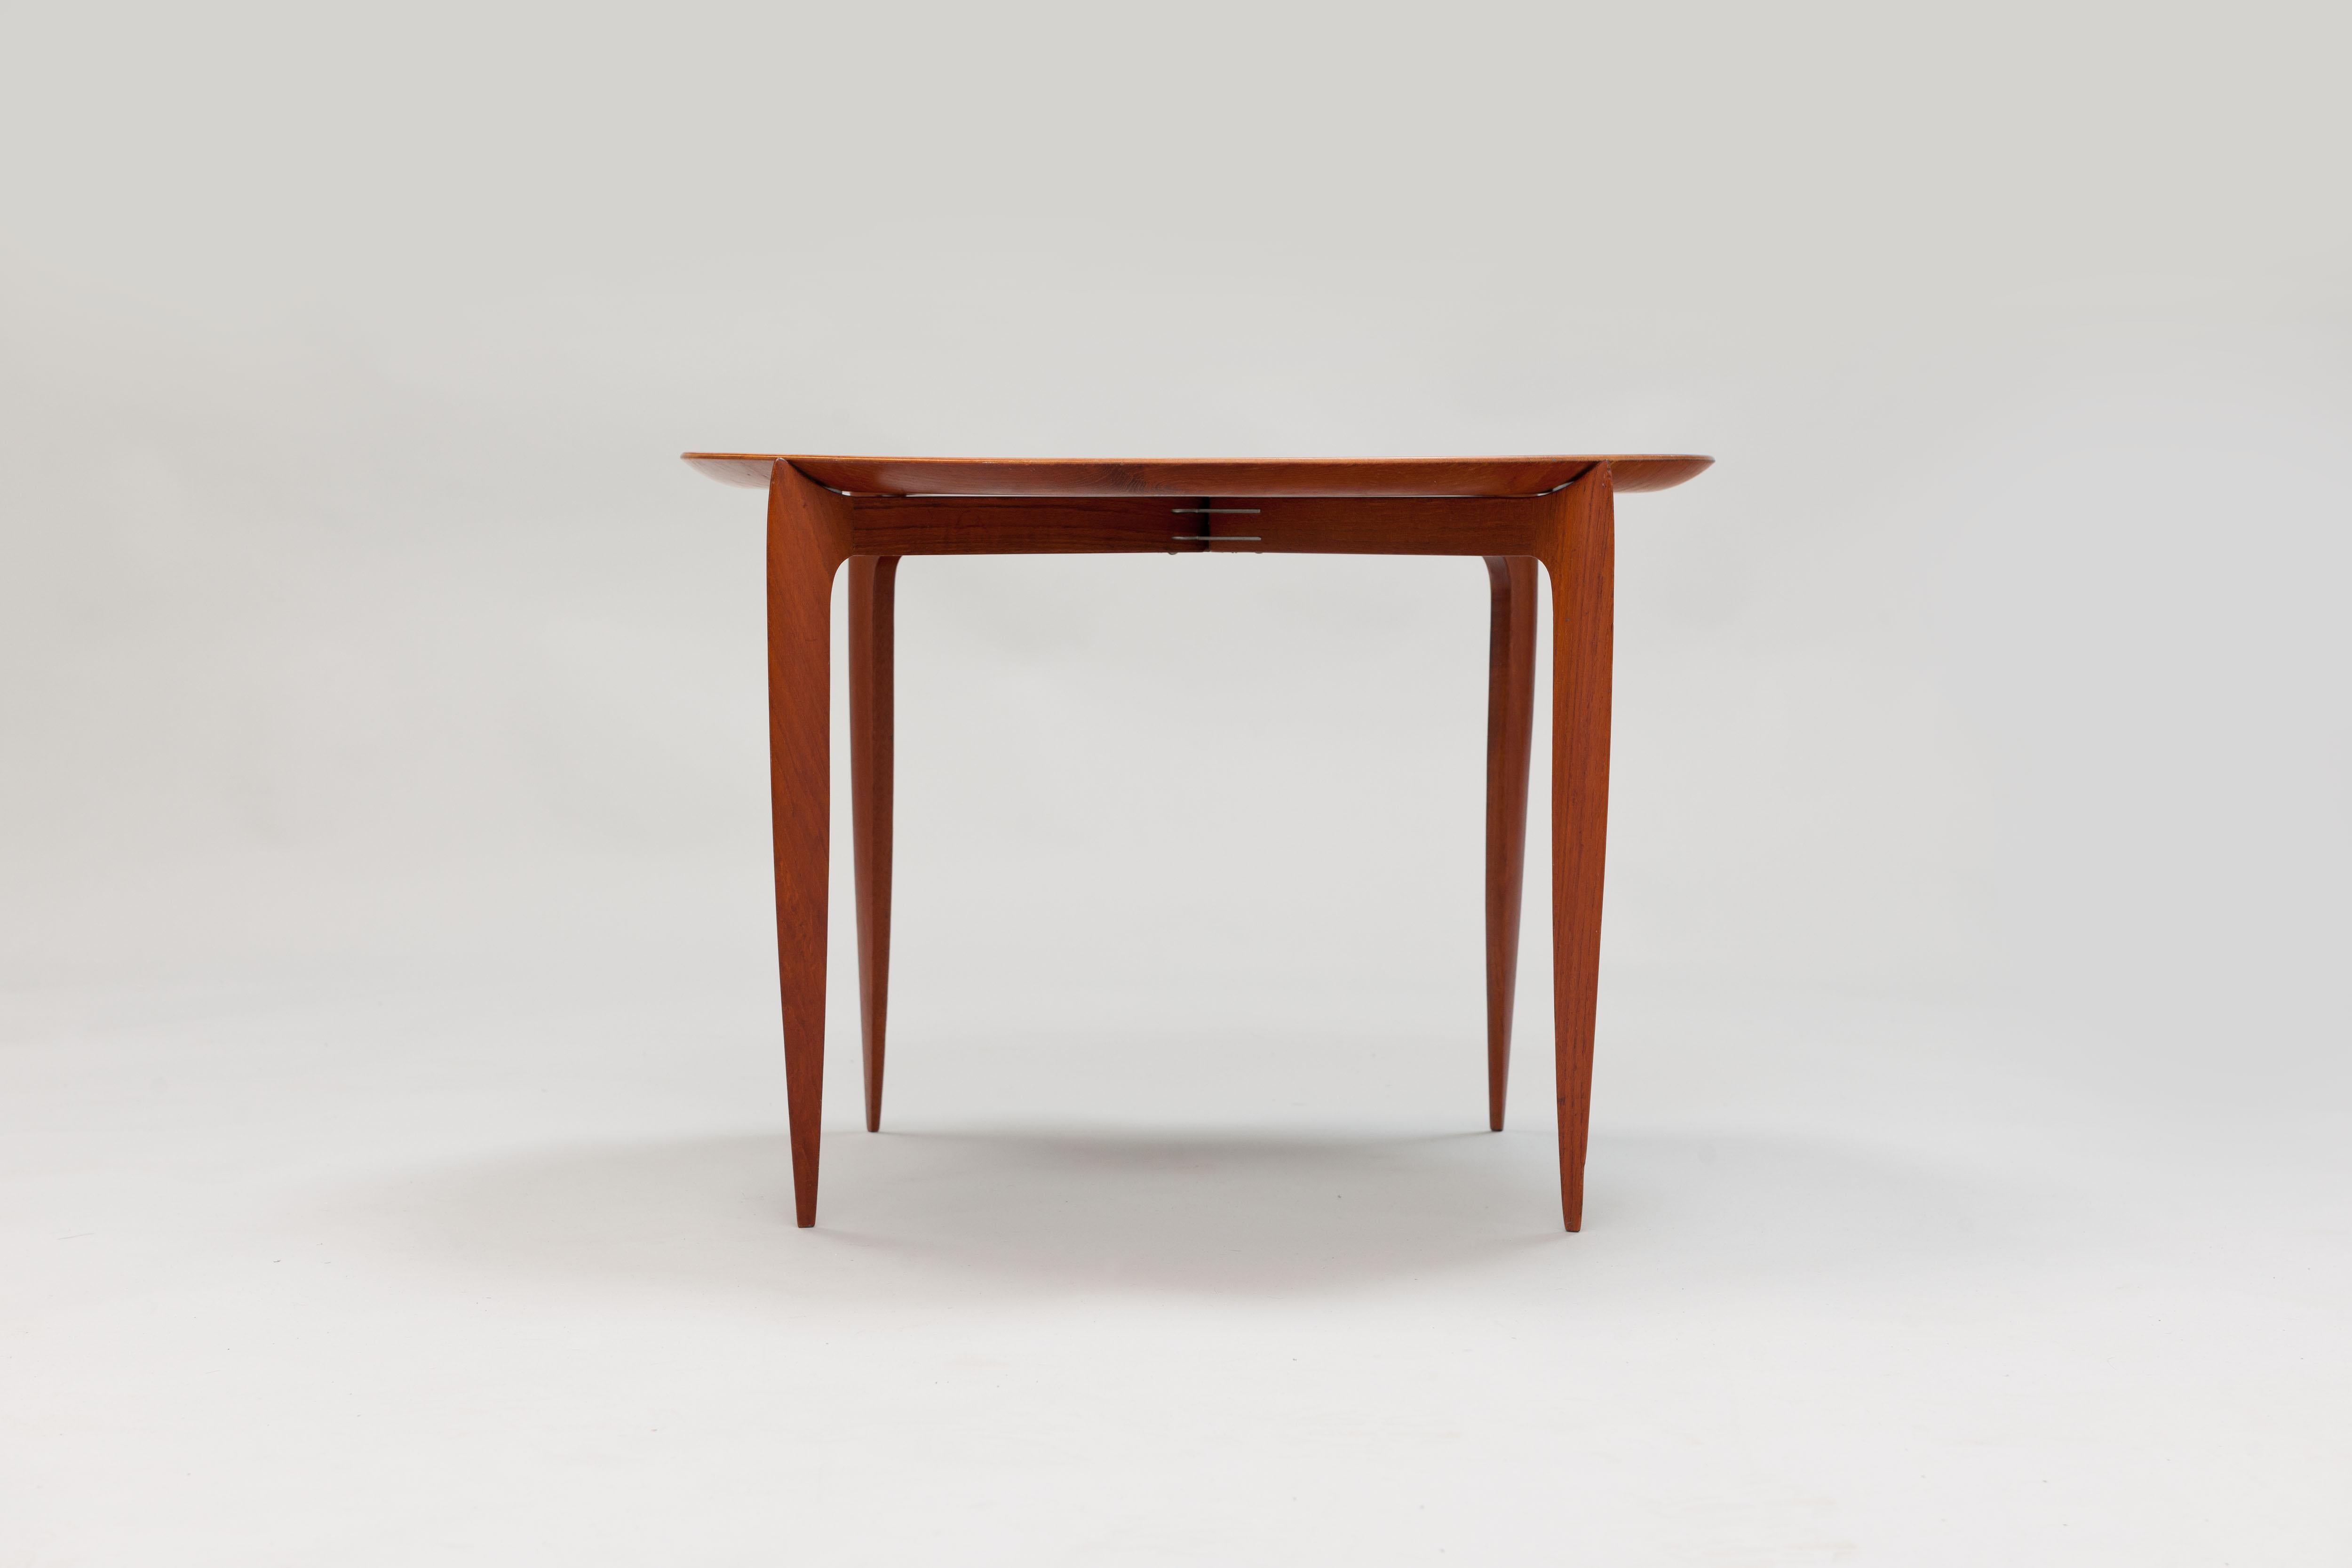 Tray table model 4508 was initially designed in 1957 for the employees of Fritz Hansen. However, the design by designers Svend Åge Willumsen and Hans Engholm was so successful that it was put into production after many requests from friends and